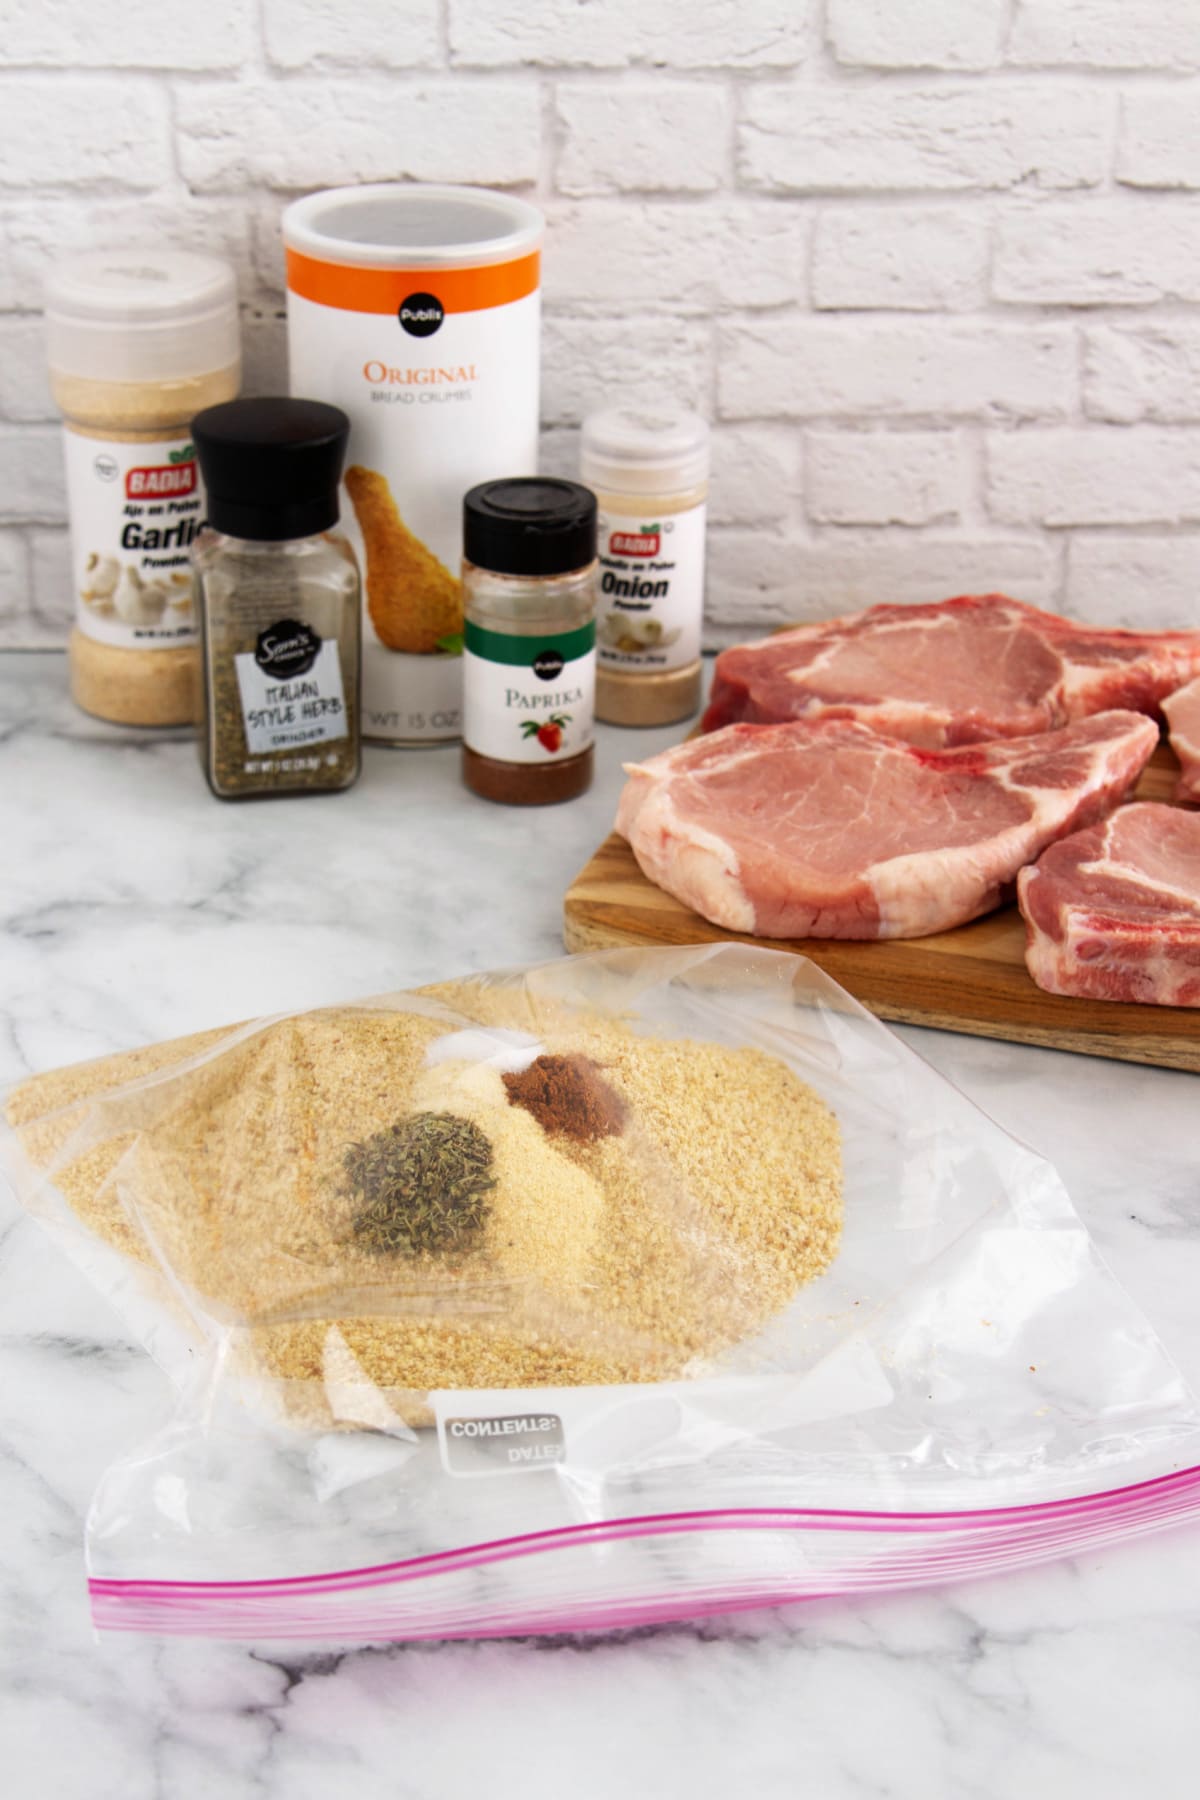 Ingredients for shake and bake pork chops in a bag